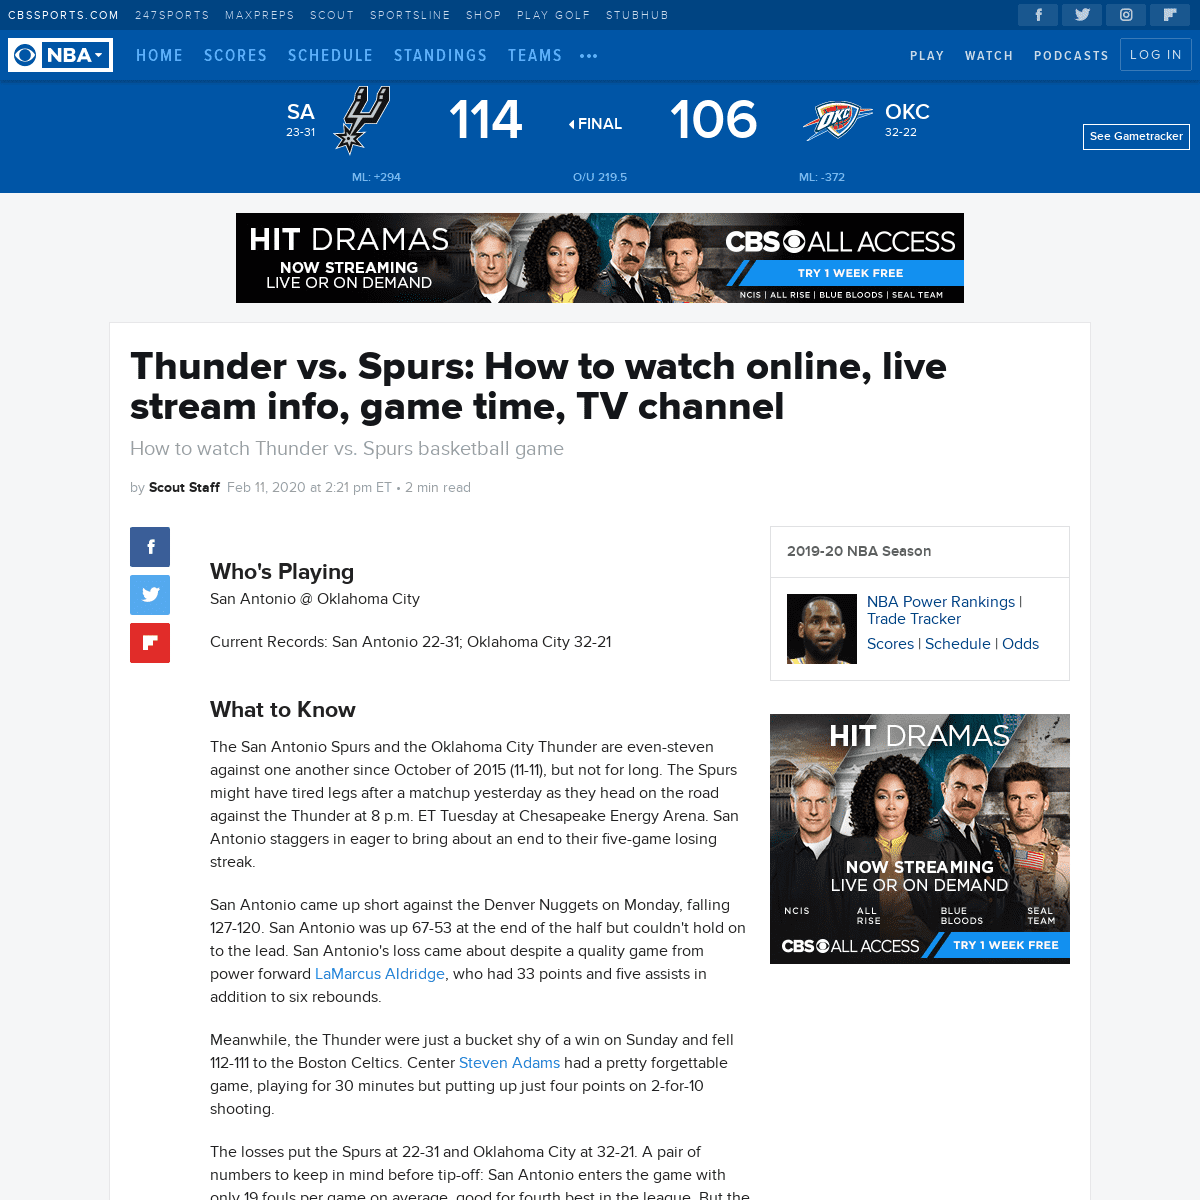 A complete backup of www.cbssports.com/nba/news/thunder-vs-spurs-how-to-watch-online-live-stream-info-game-time-tv-channel/